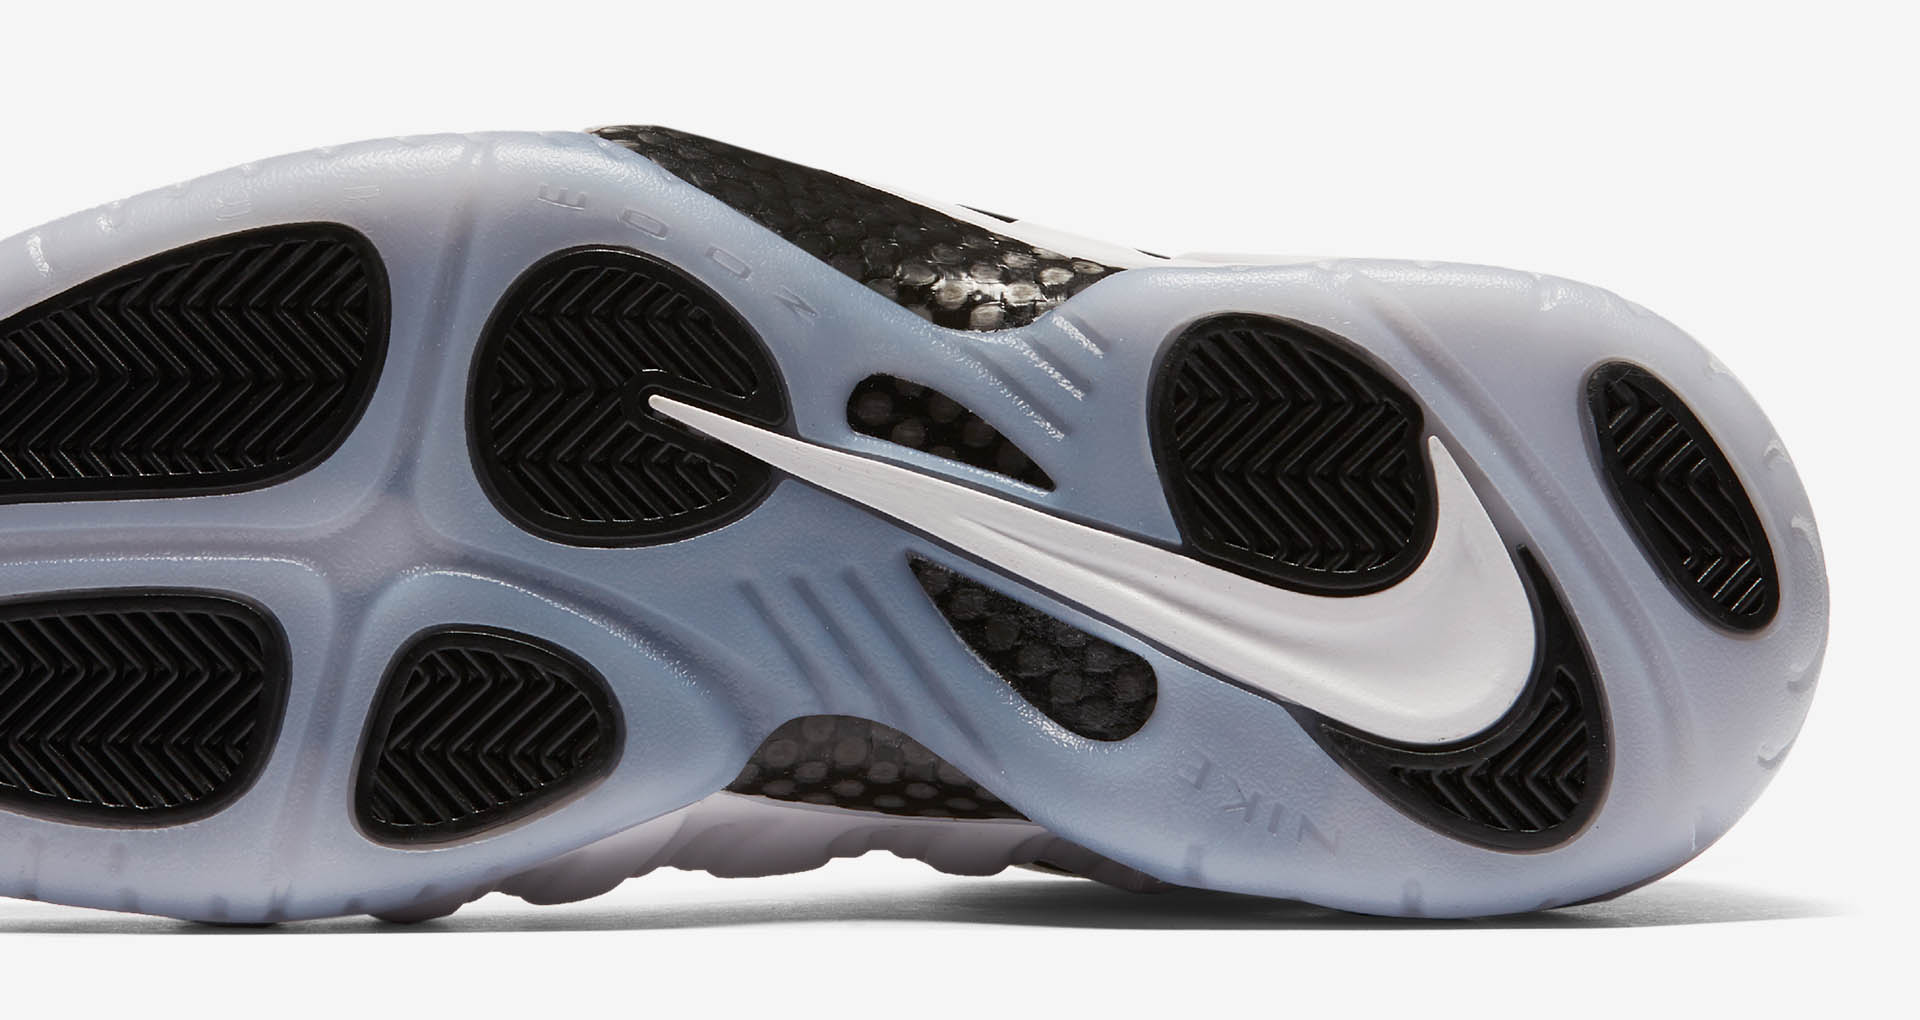 The Nike Air Foamposite Pro 'Swoosh Flavors' Sports Removable Swooshes ...